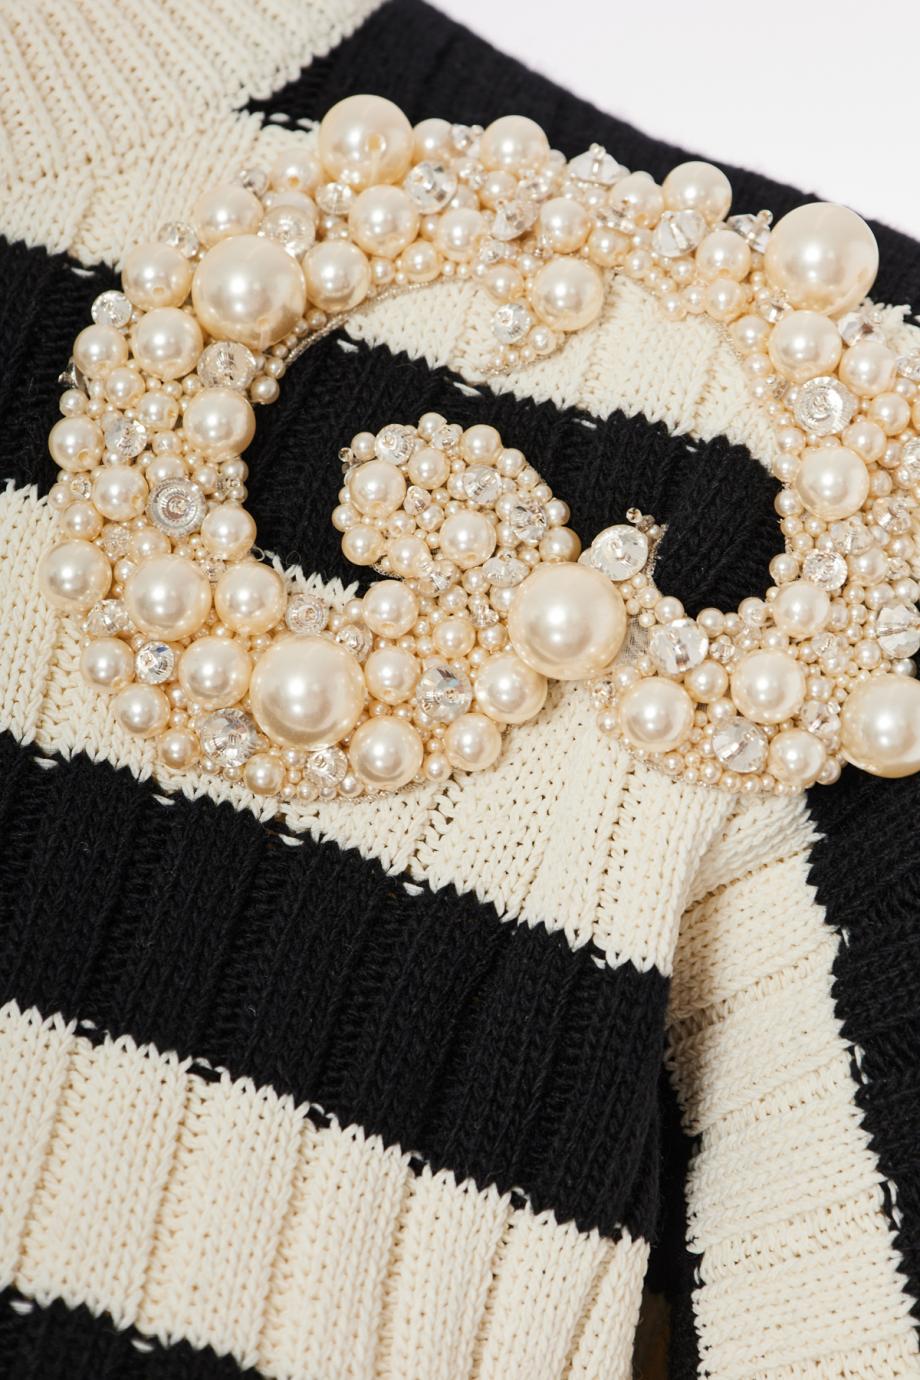 Embellished wool and cashmere sweater